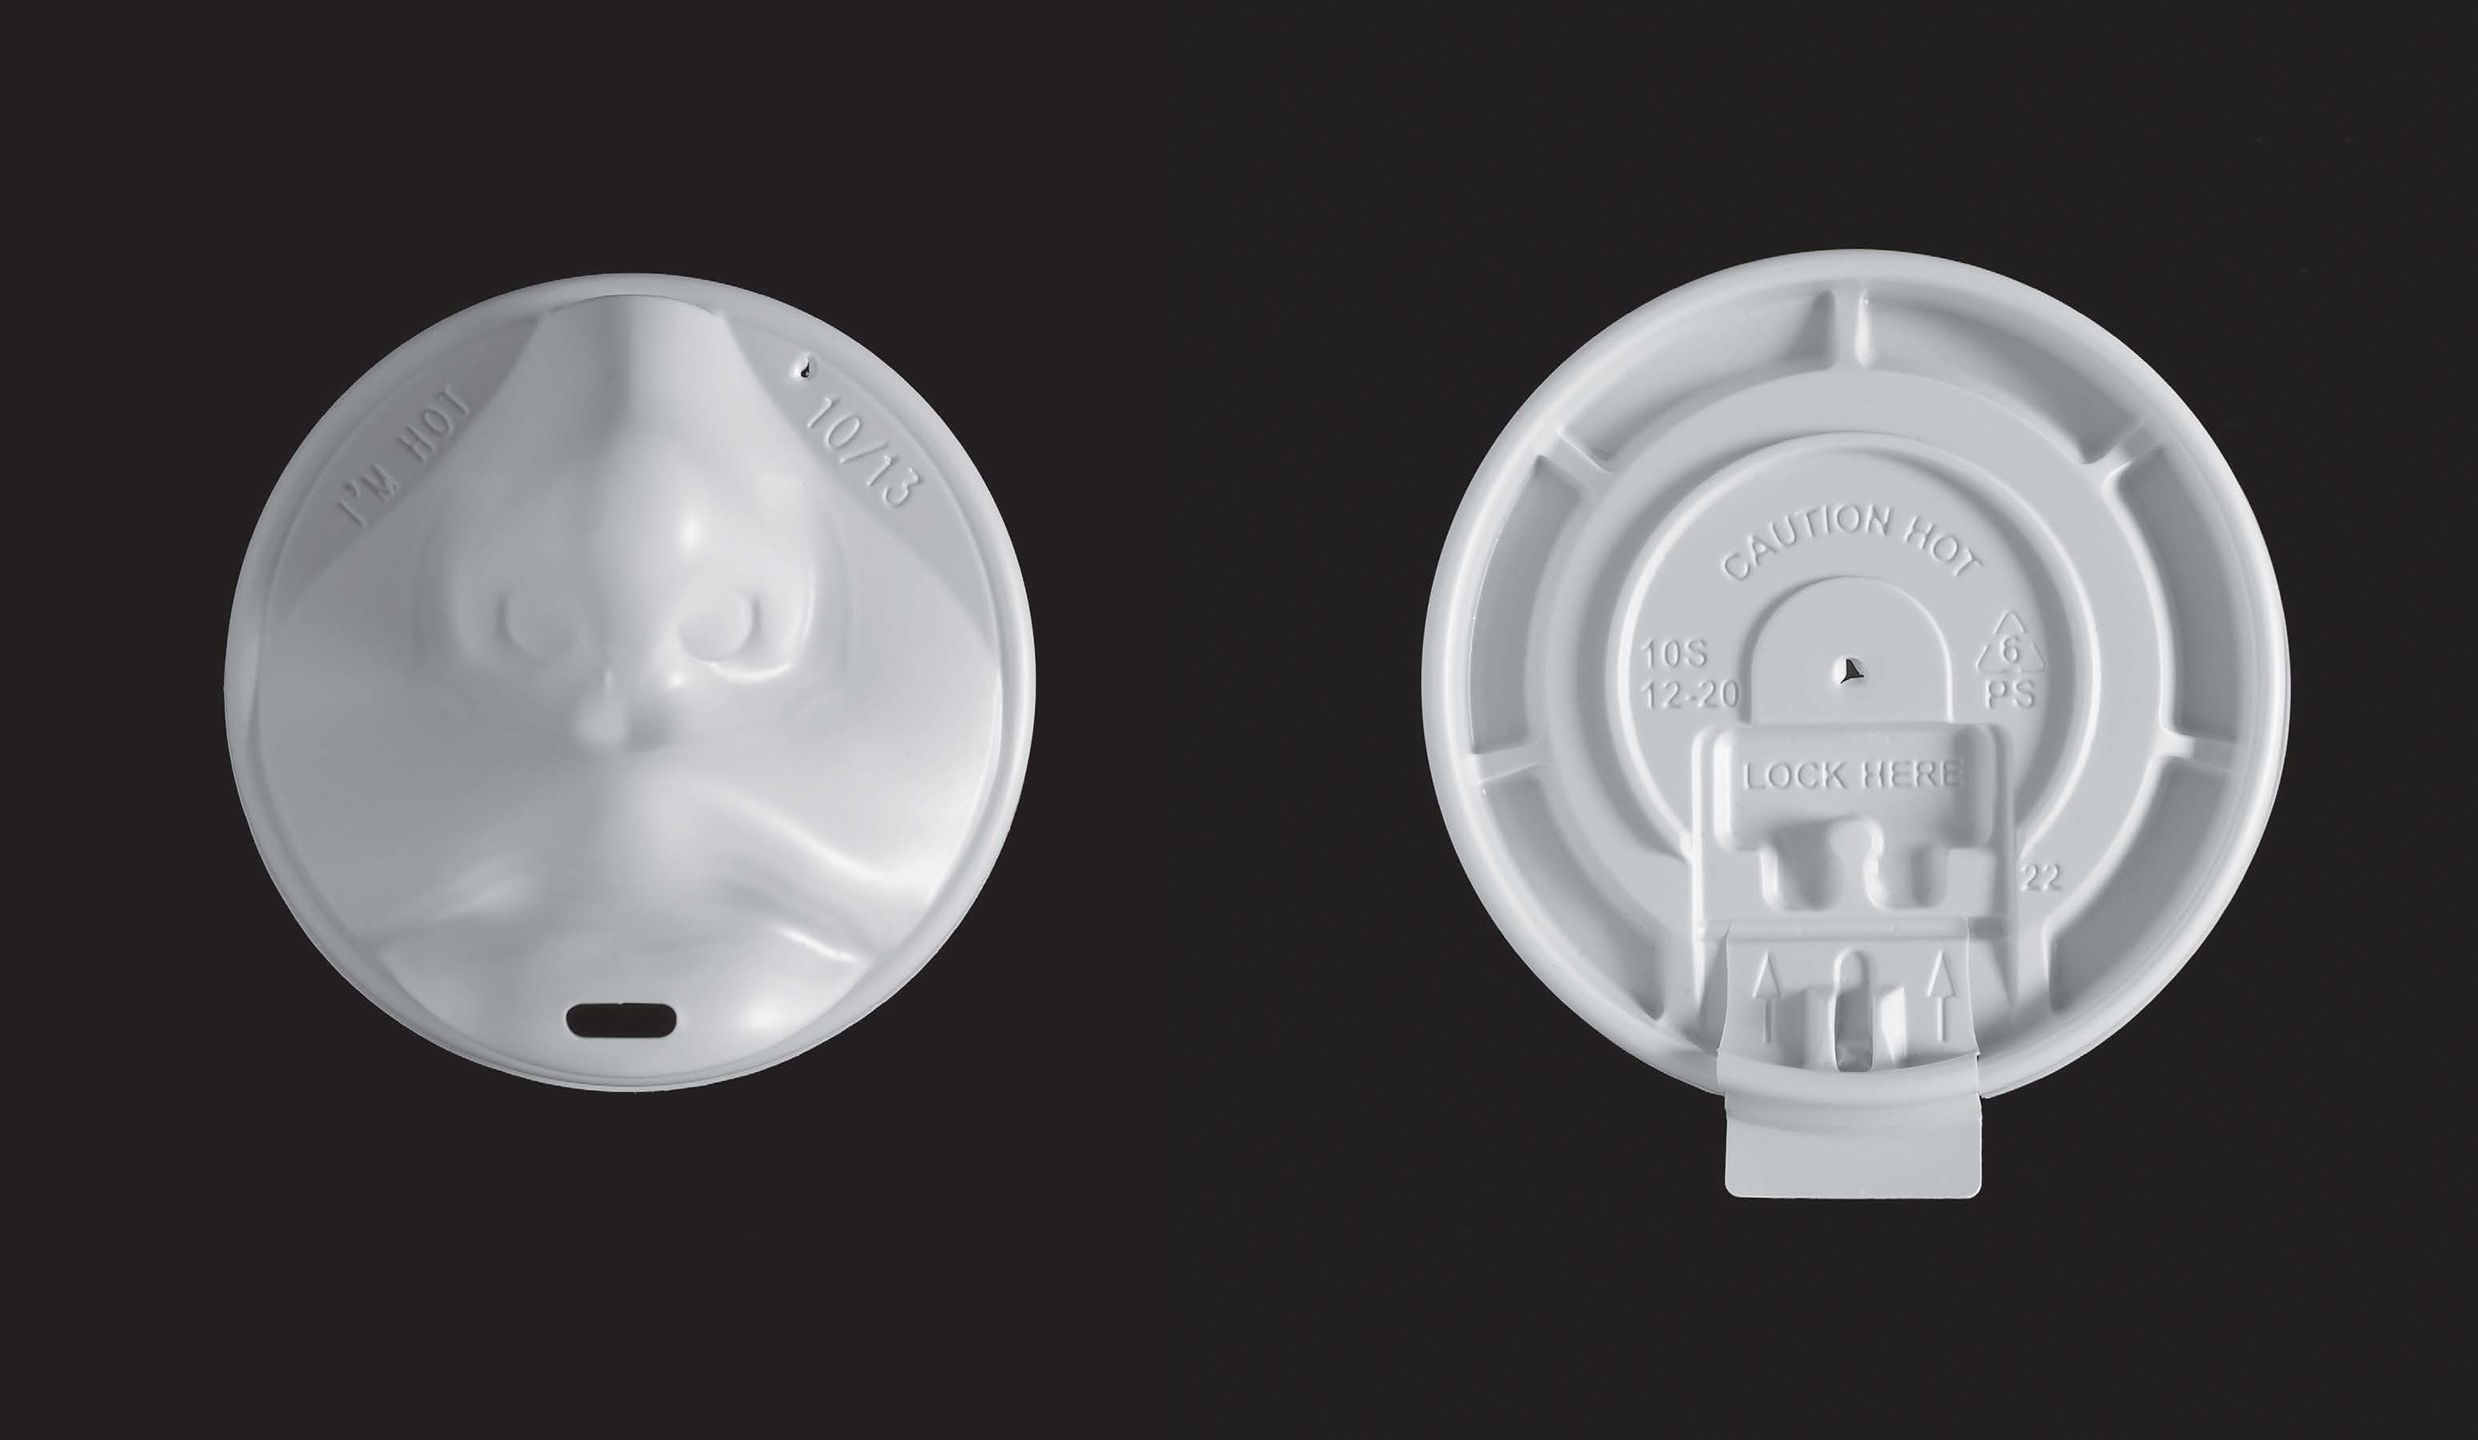 Coffee mug lid design - CAD / Show and tell - Talk Manufacturing